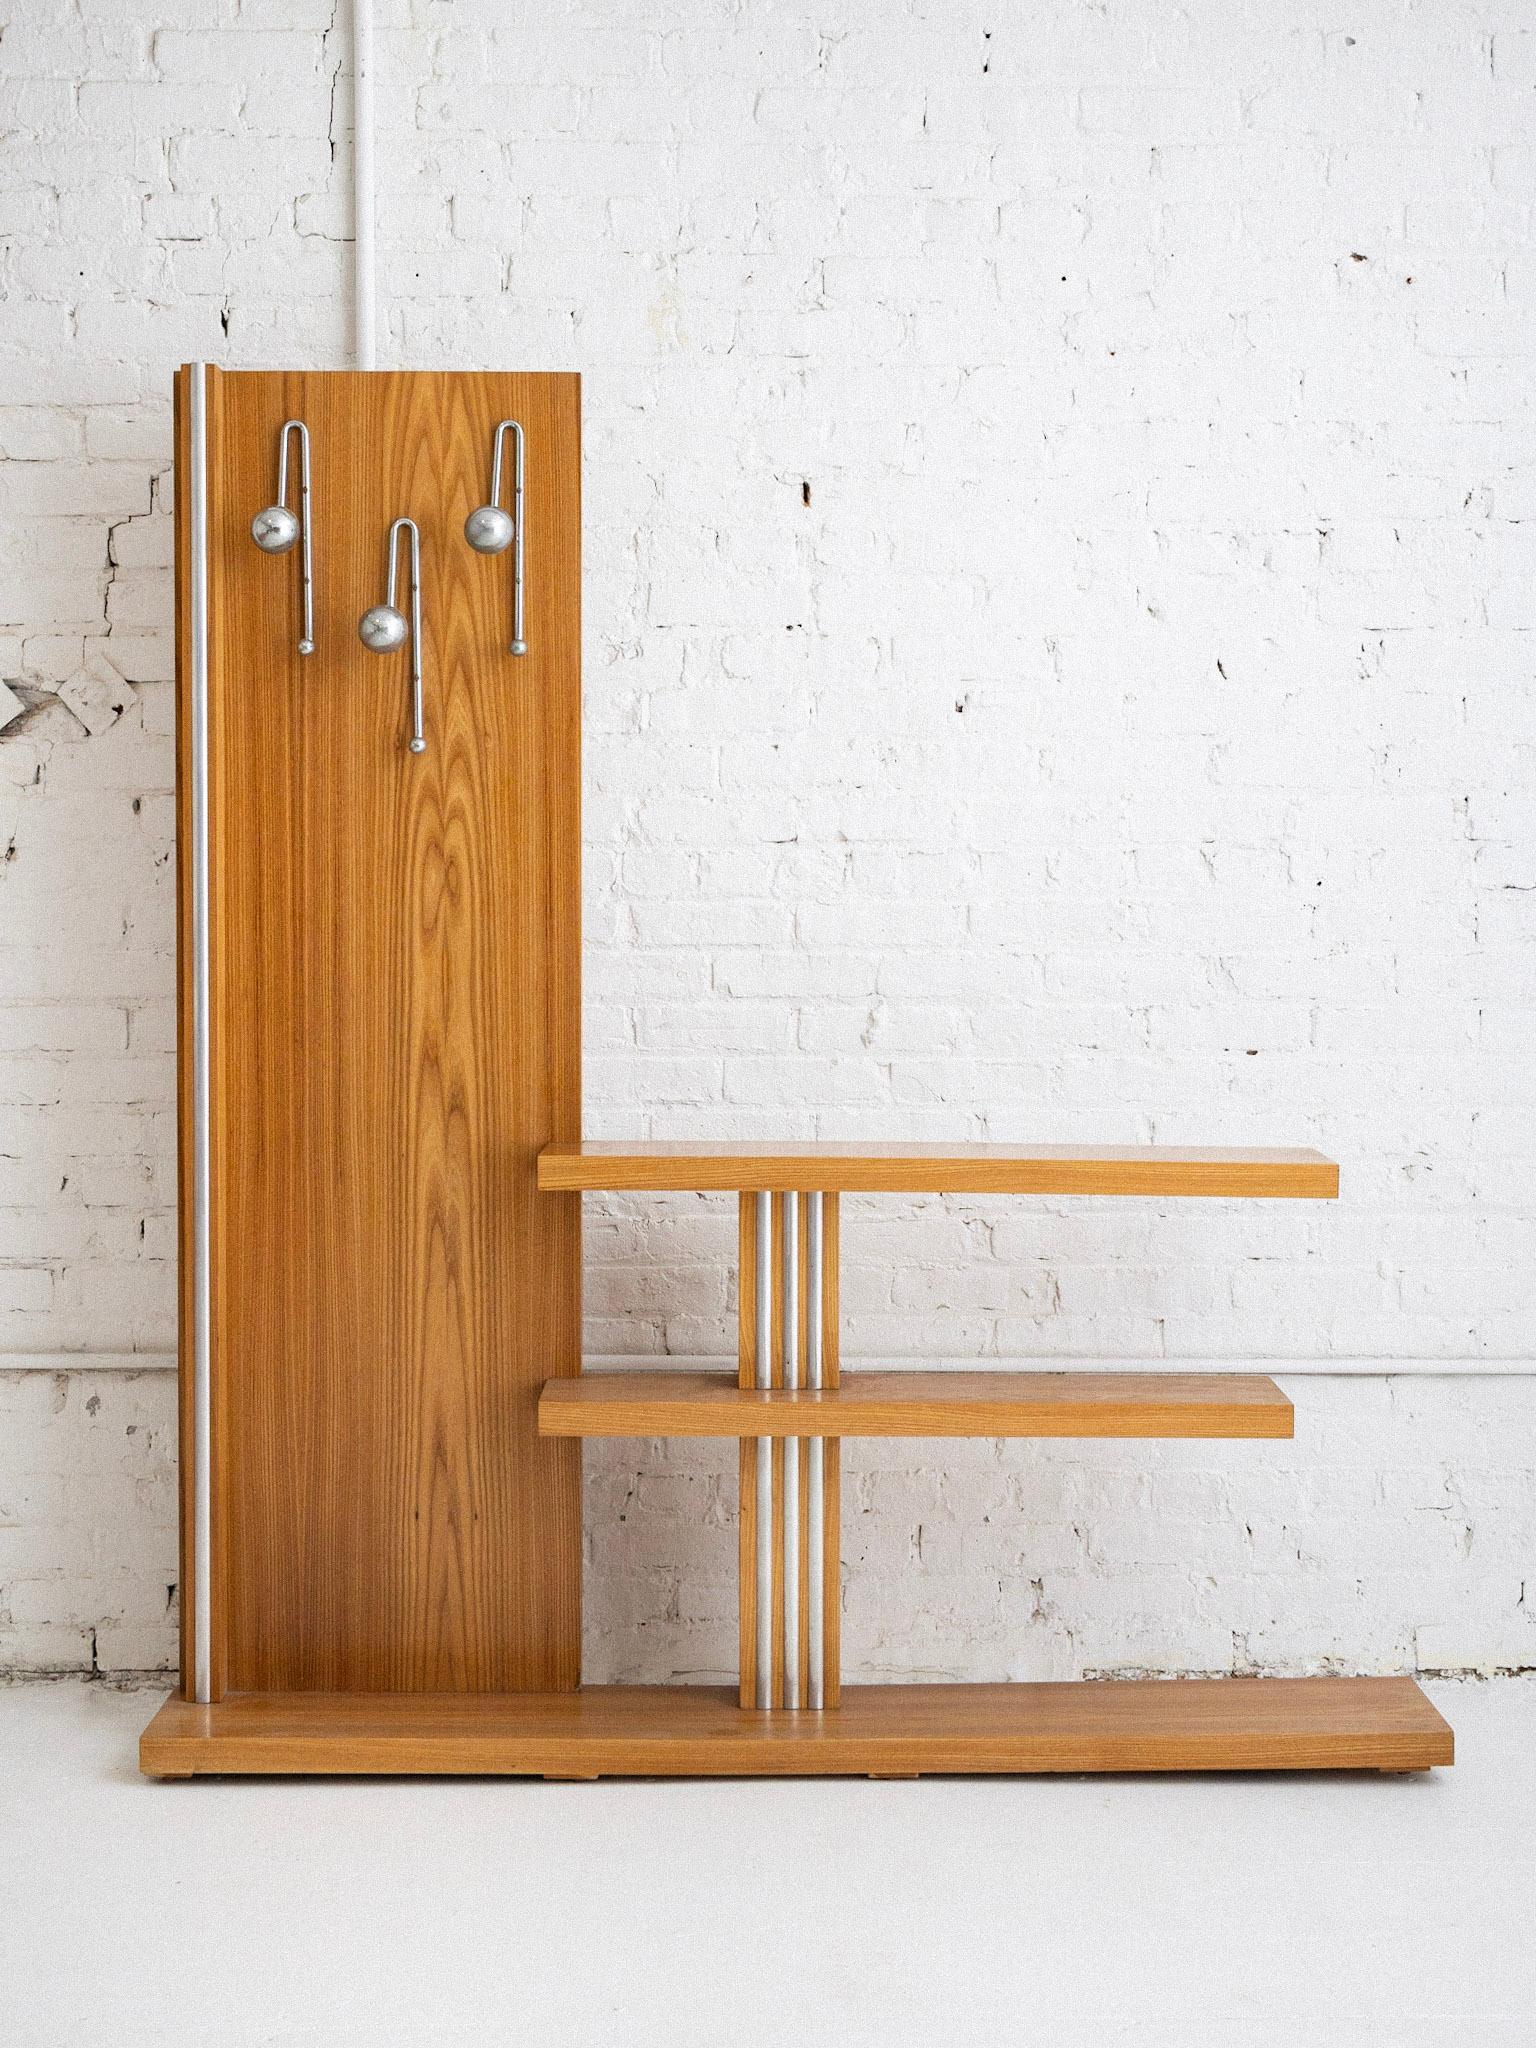 A free standing mid century Italian “hall tree” or coat rack. Blonde wood and chrome details. Two shelves for storage. Chrome coated plastic hooks. Sourced in Northern Italy.